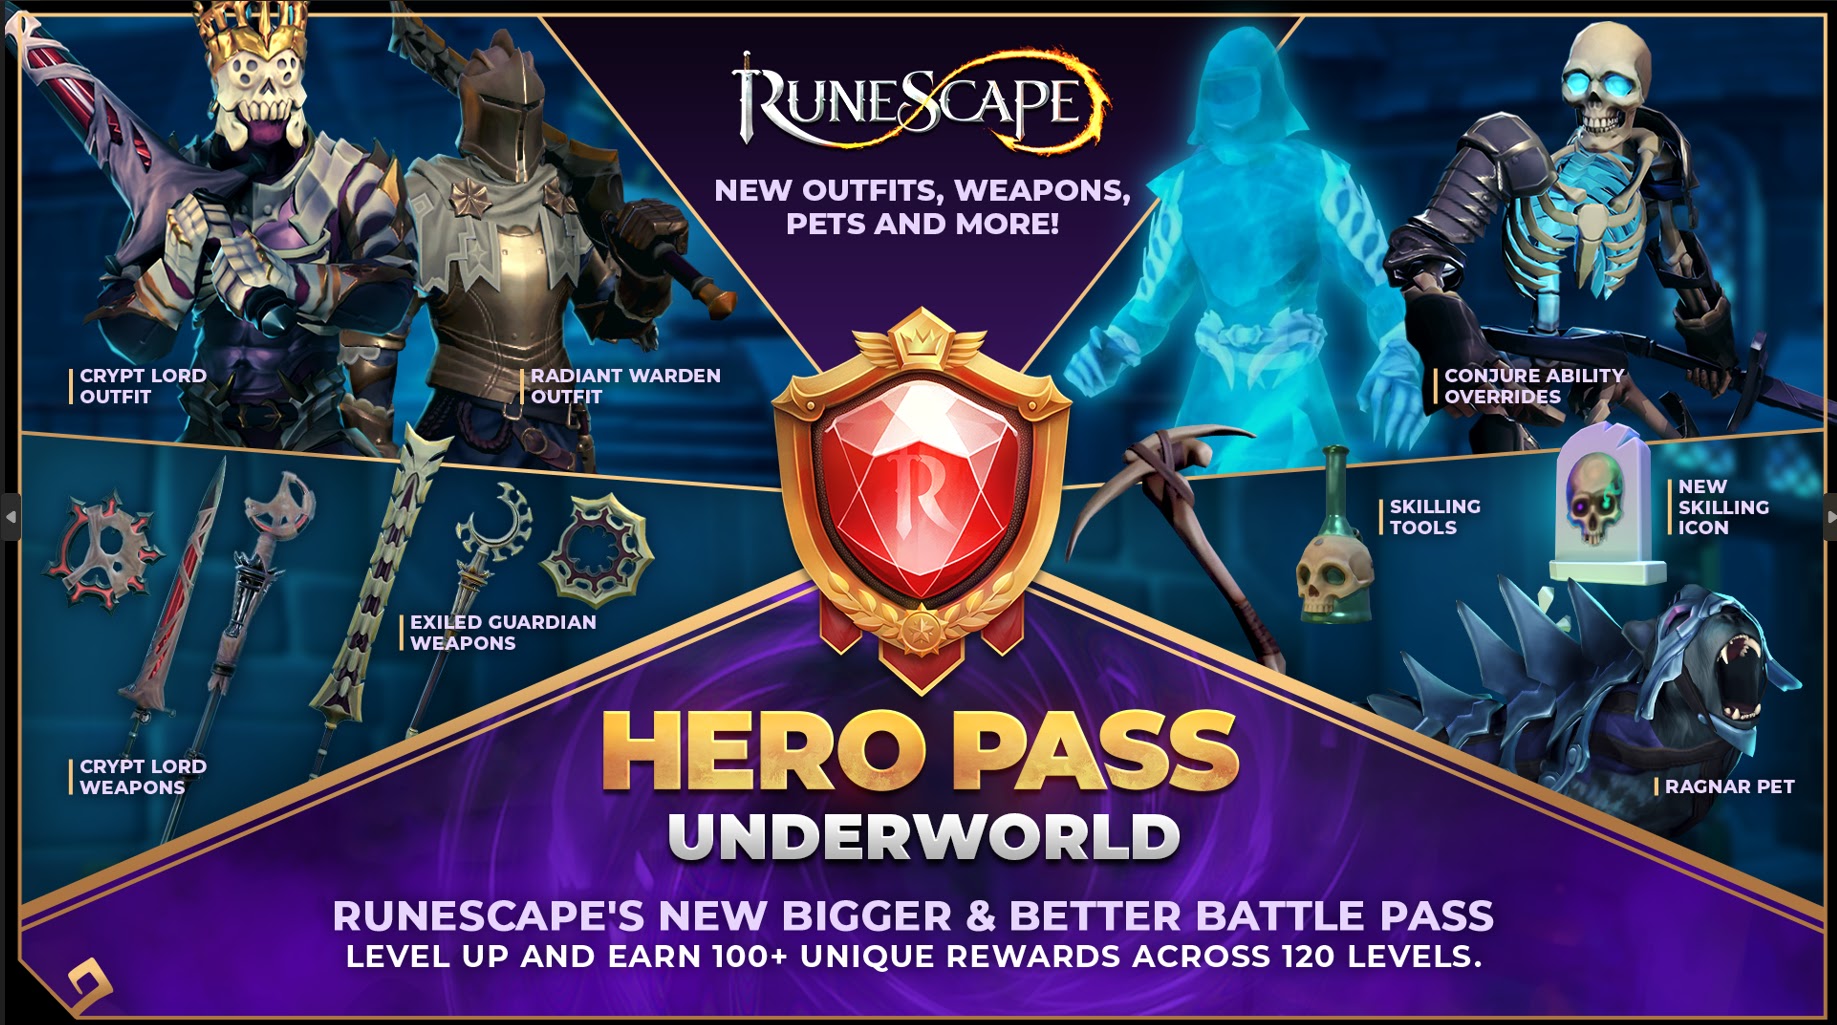 RuneScape Launches Hero Pass, a New Battle Pass with Longer Seasons and Over a Hundred New Rewards